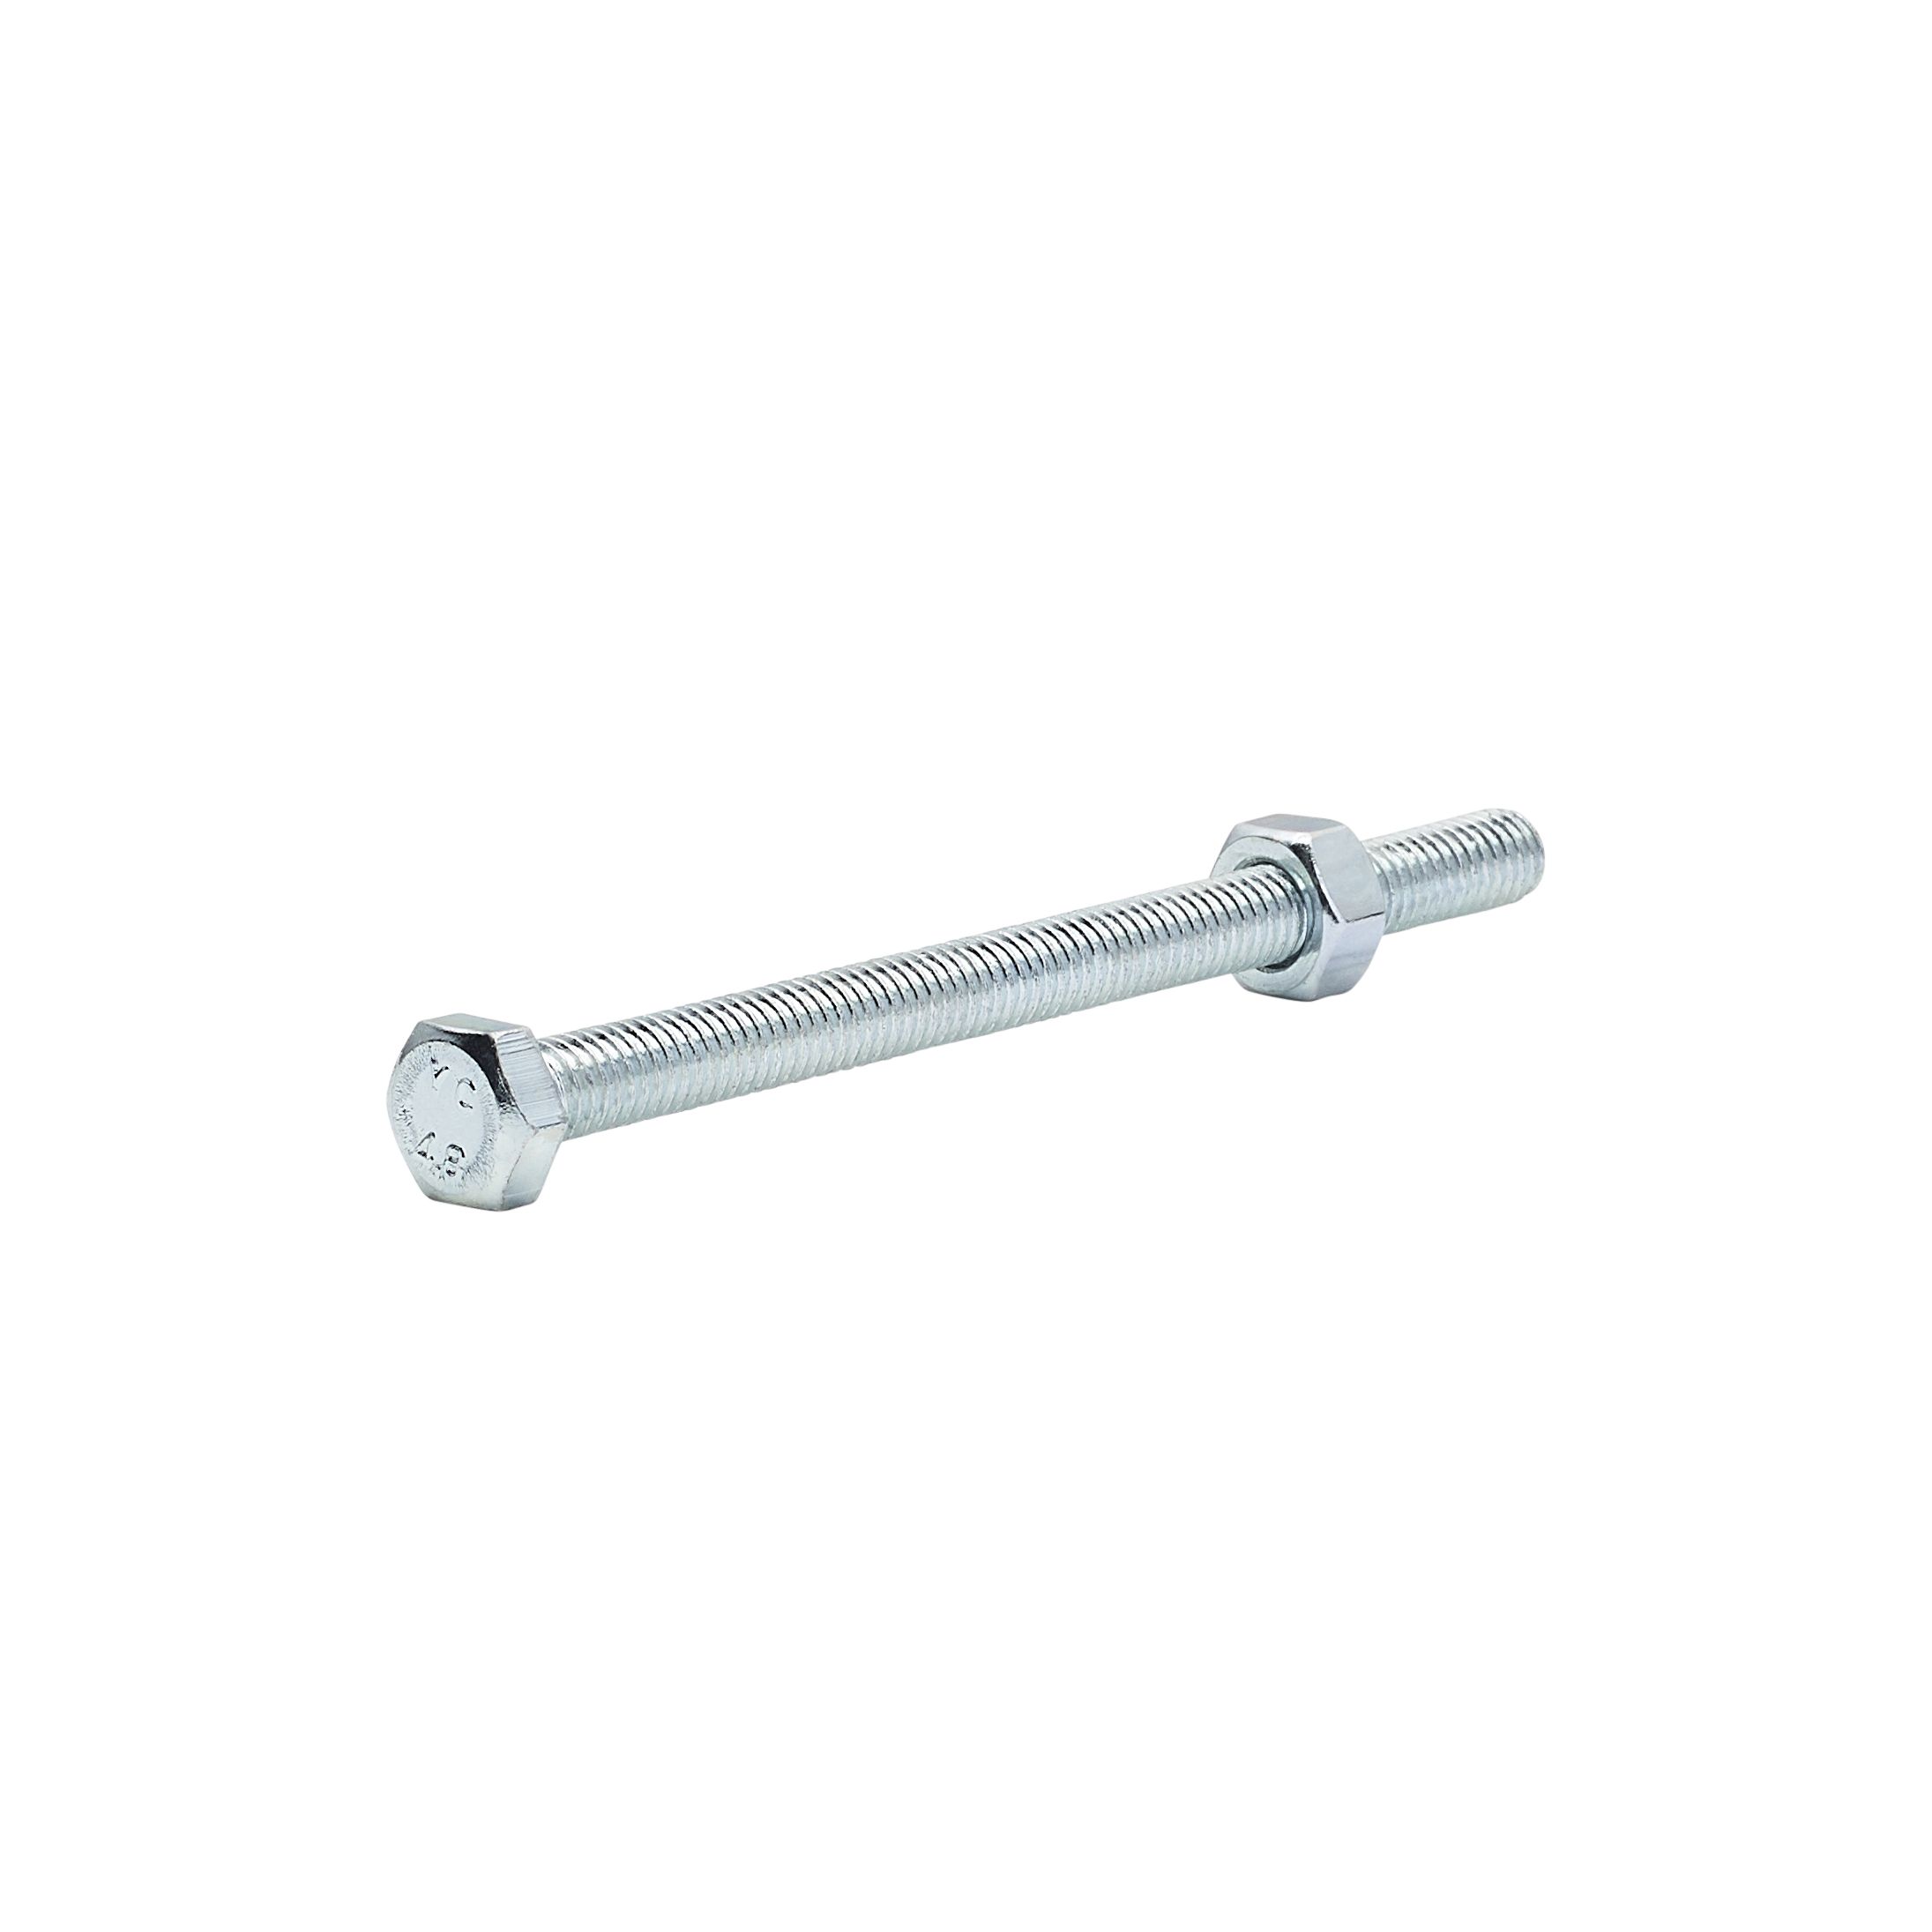 Diall M6 Hex Carbon steel (grade 5.8) Bolt & nut (L)80mm, Pack of 10